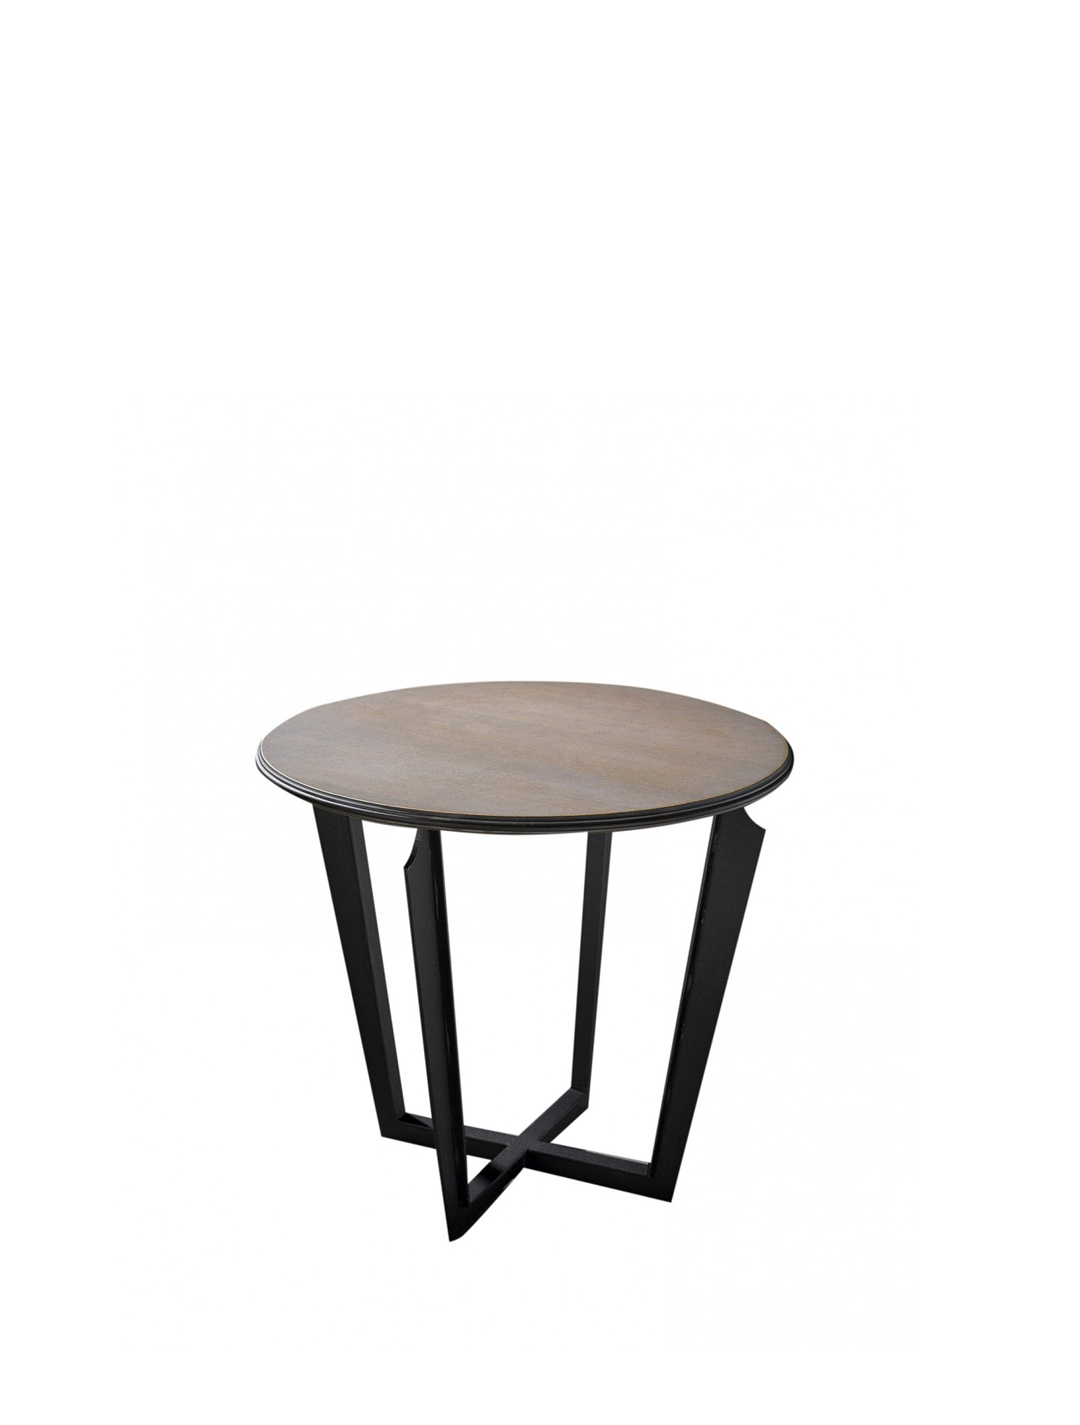 contemporary side table, modern side table